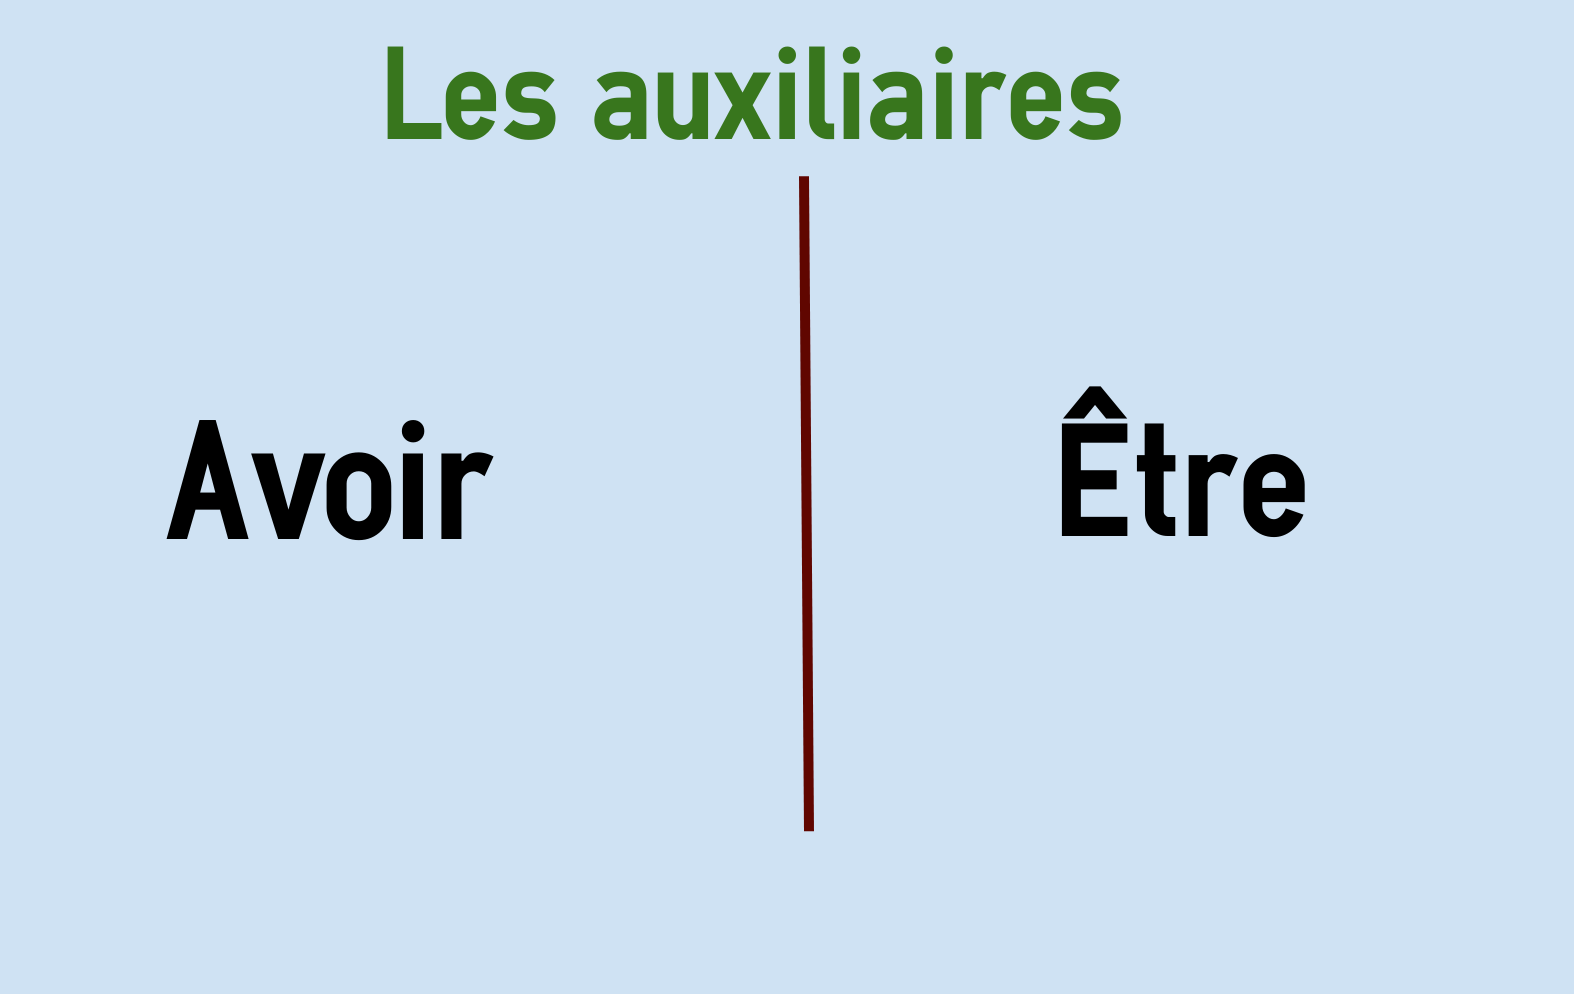 Si Clauses French Chart